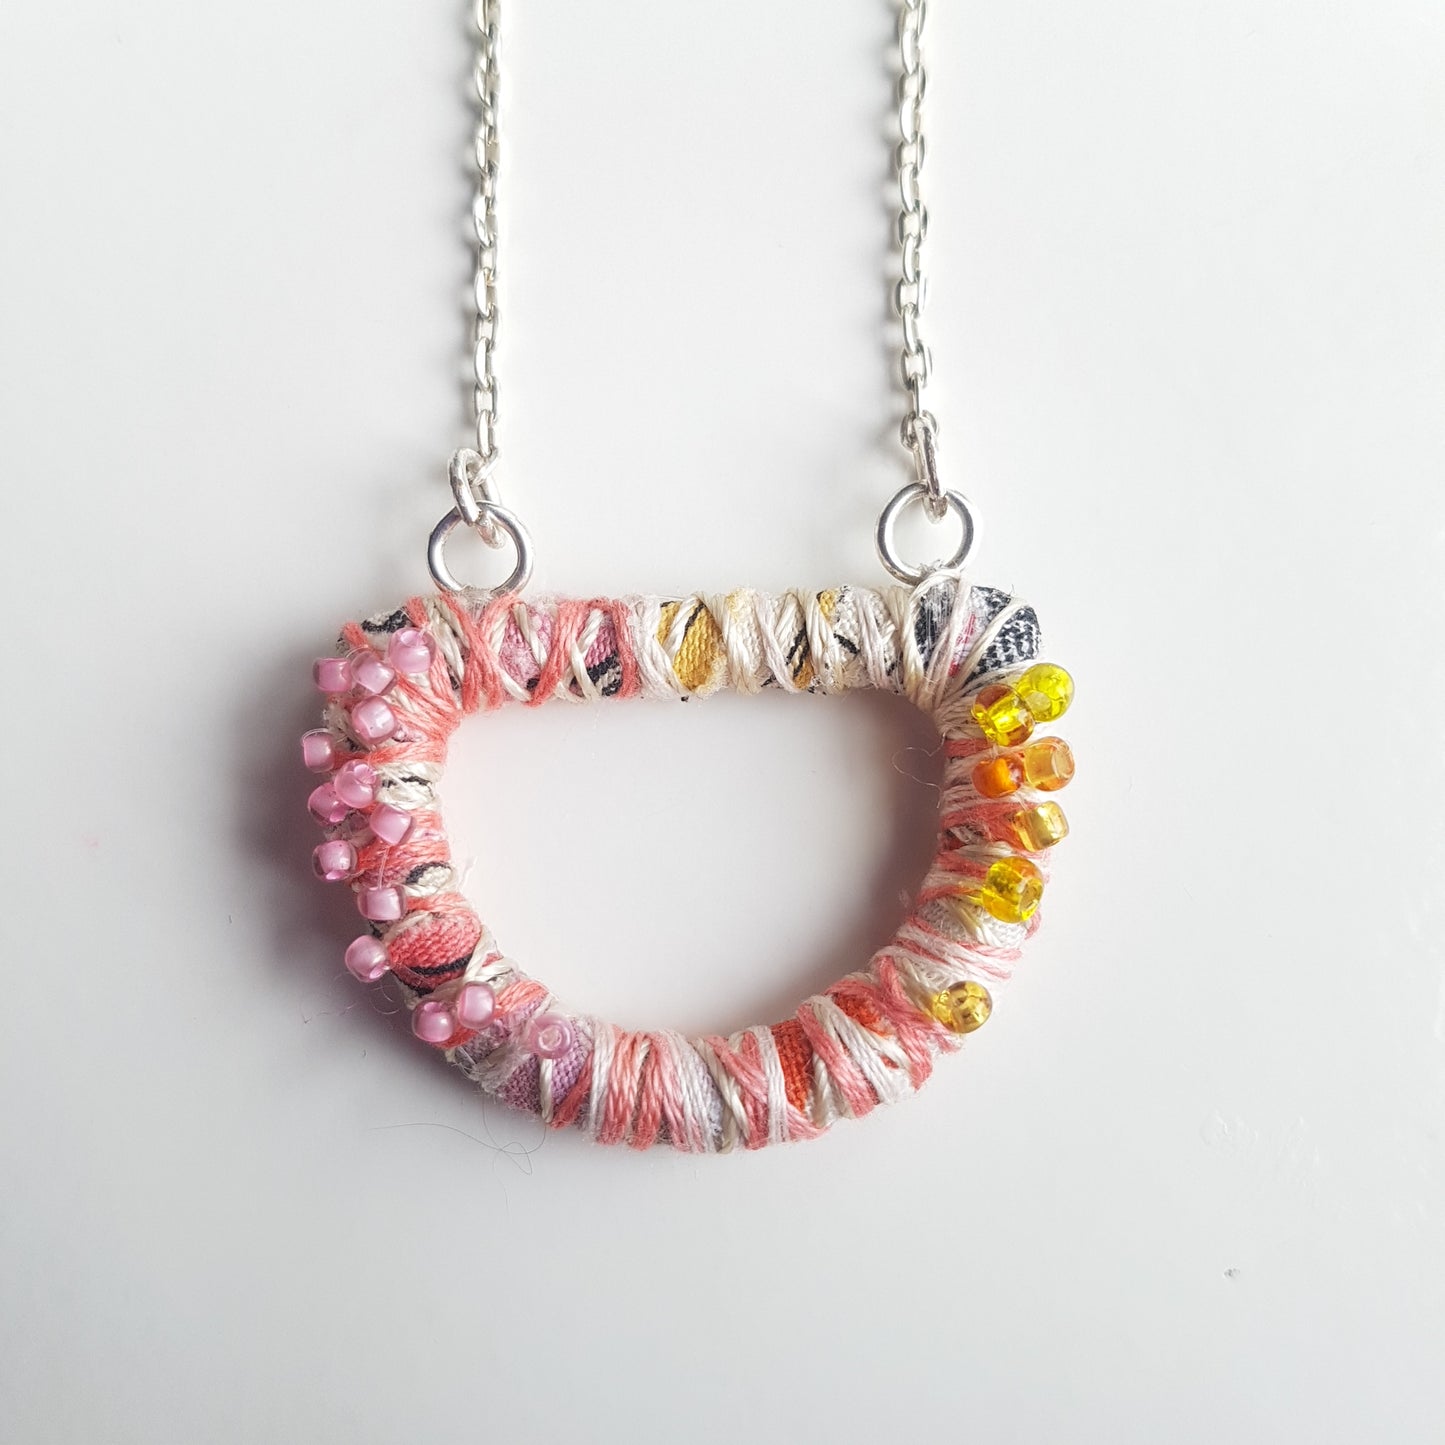 Pale pink and cream textile art necklace against a white background.